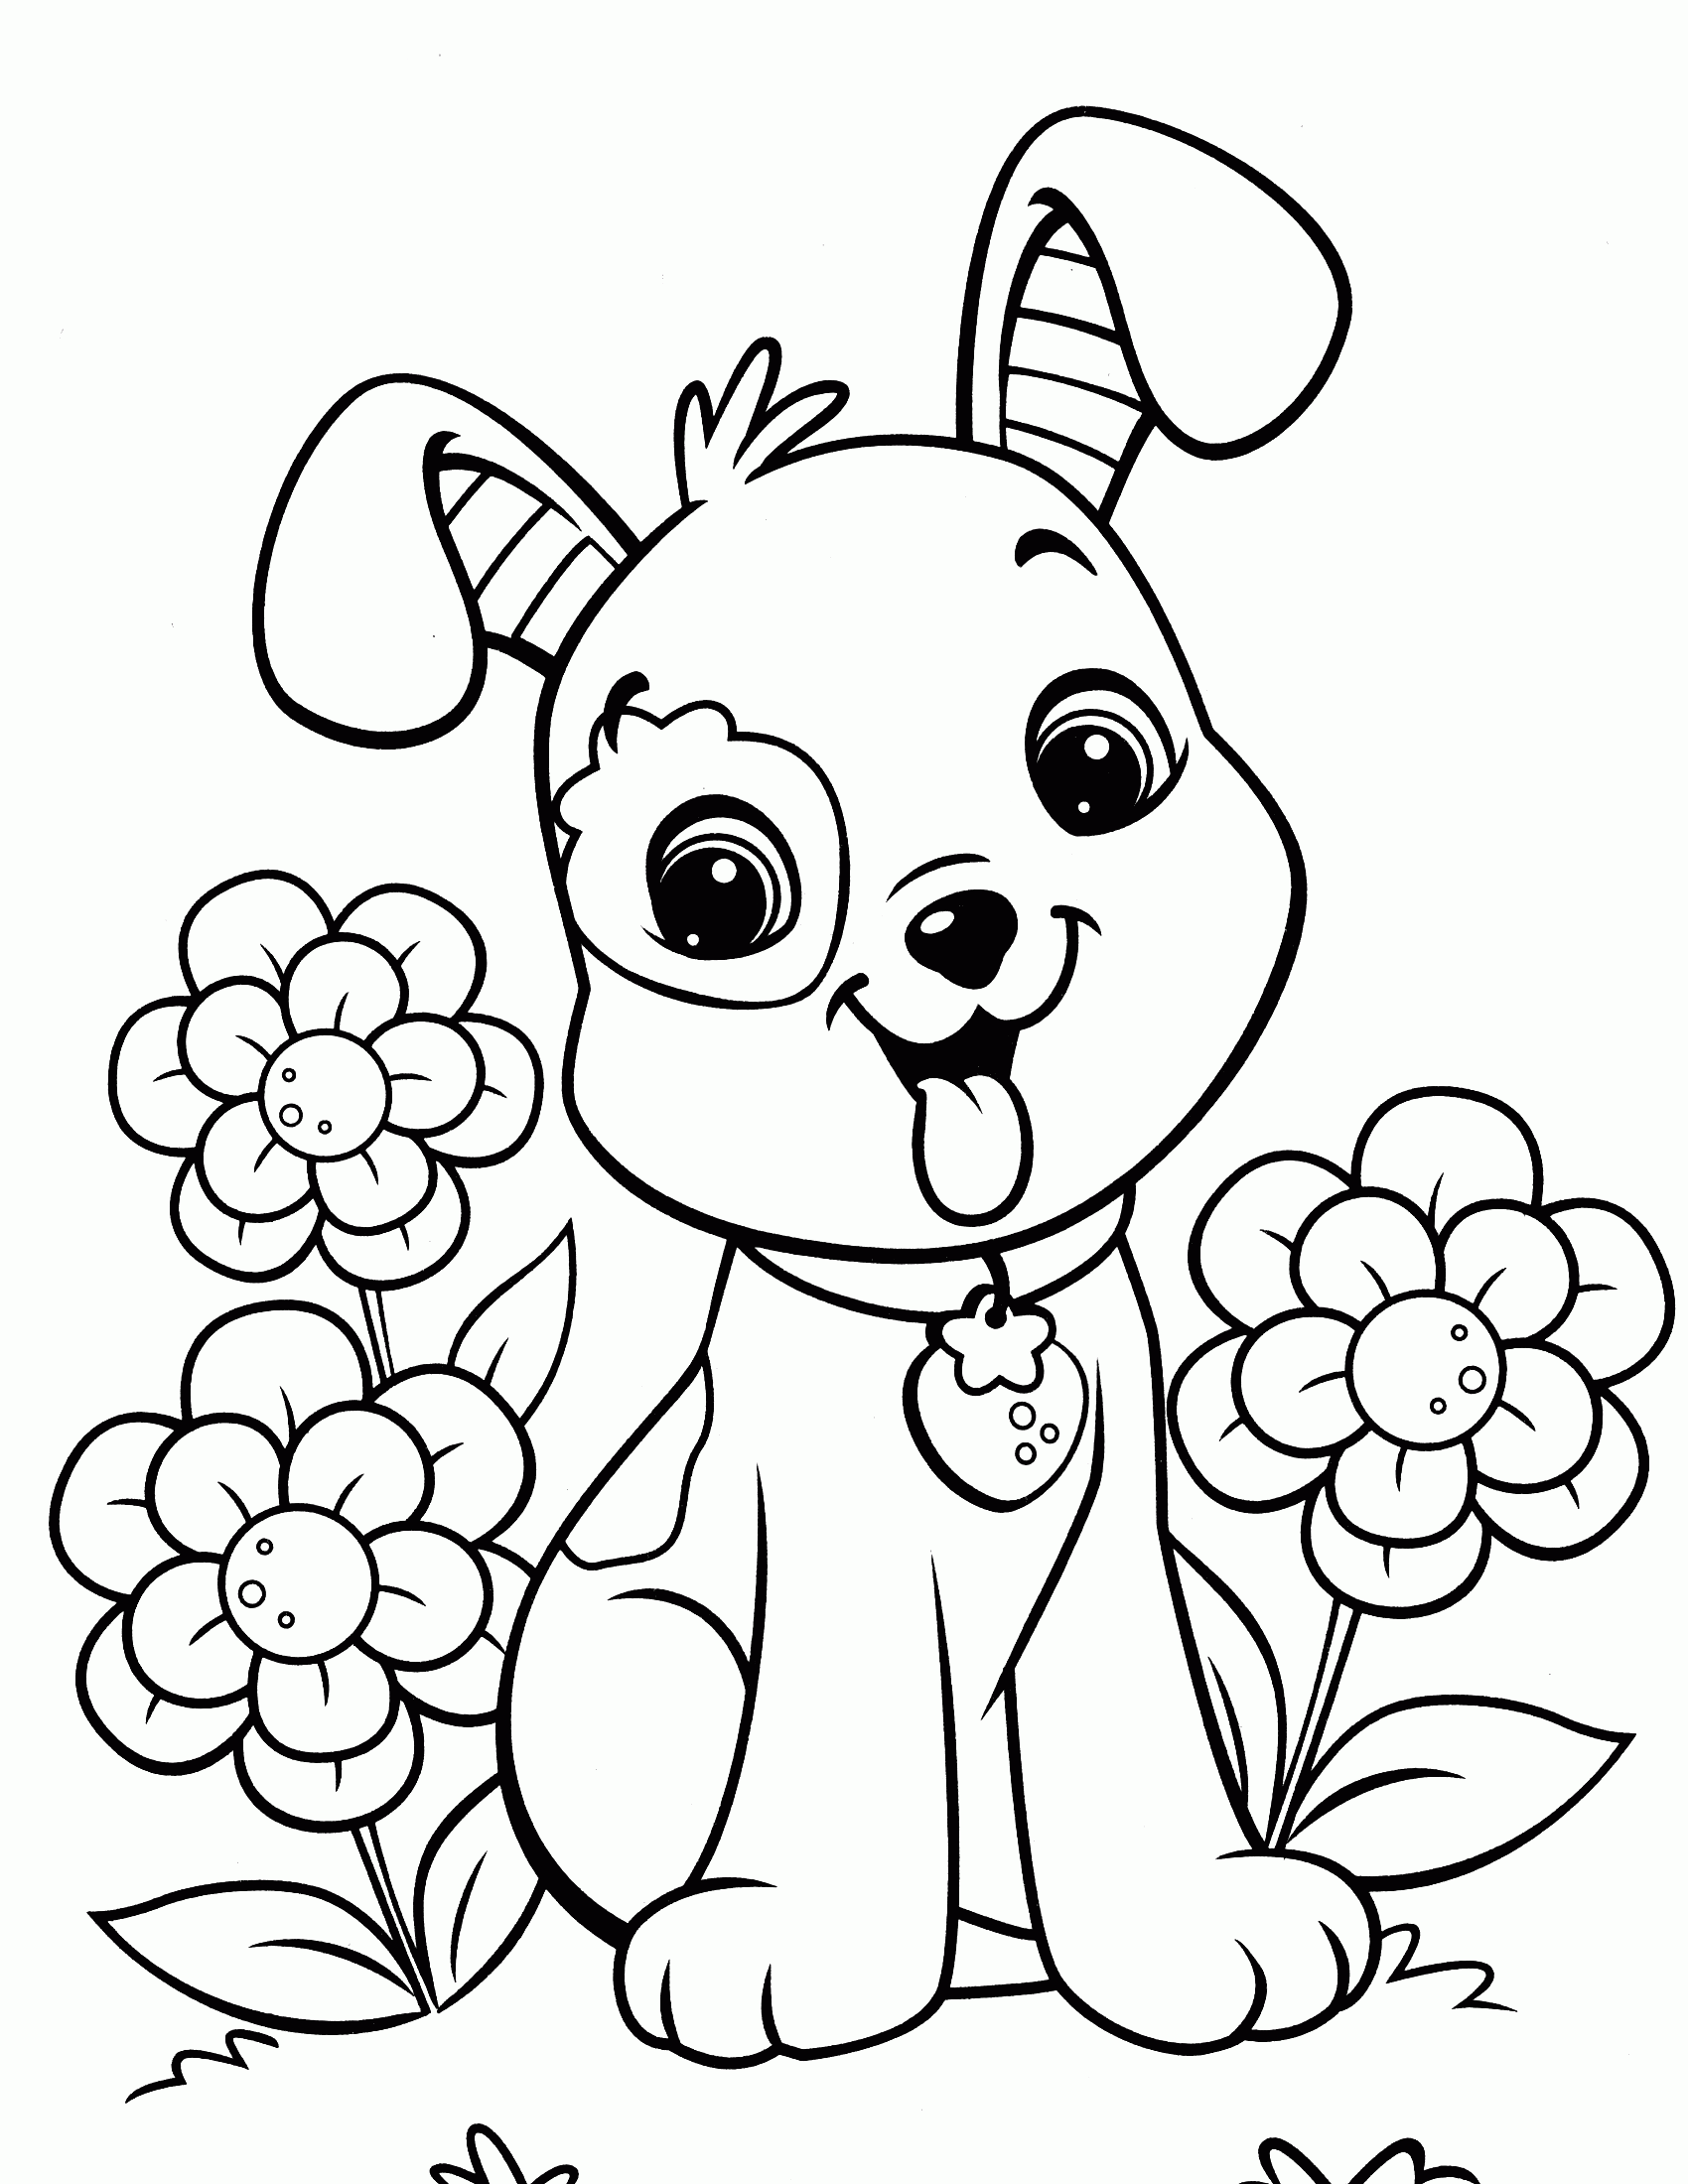 Dog Coloring Pages - Coloring Labs